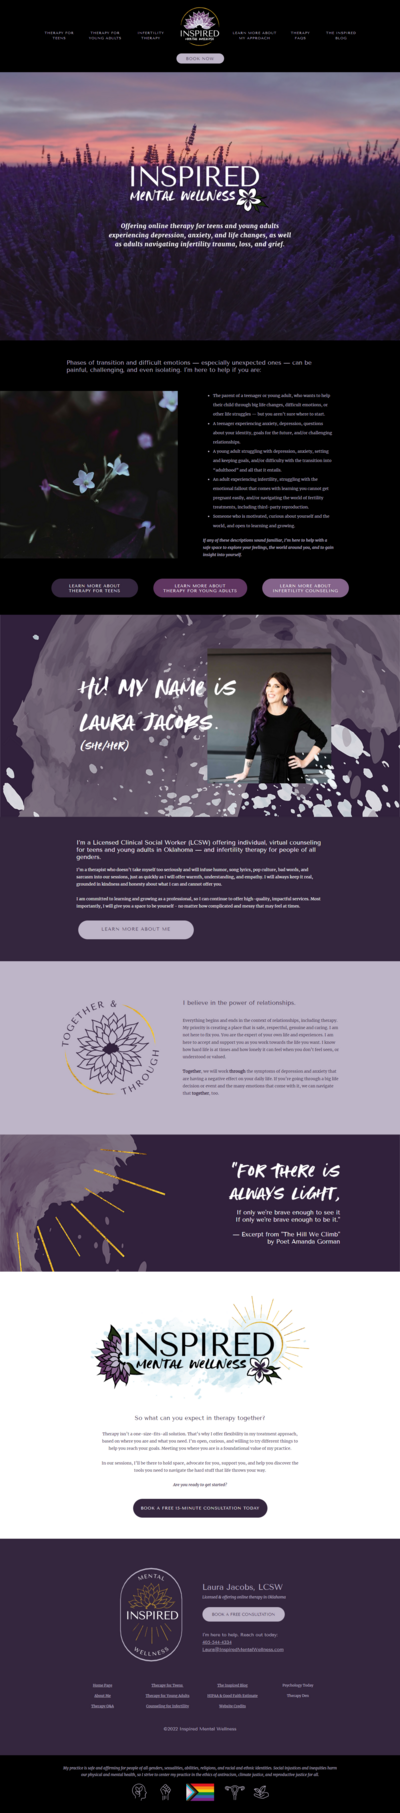 This image is a screen capture of the first page of the Inspired Mental Wellness website. It links to the portfolio page for this brand and website design project.